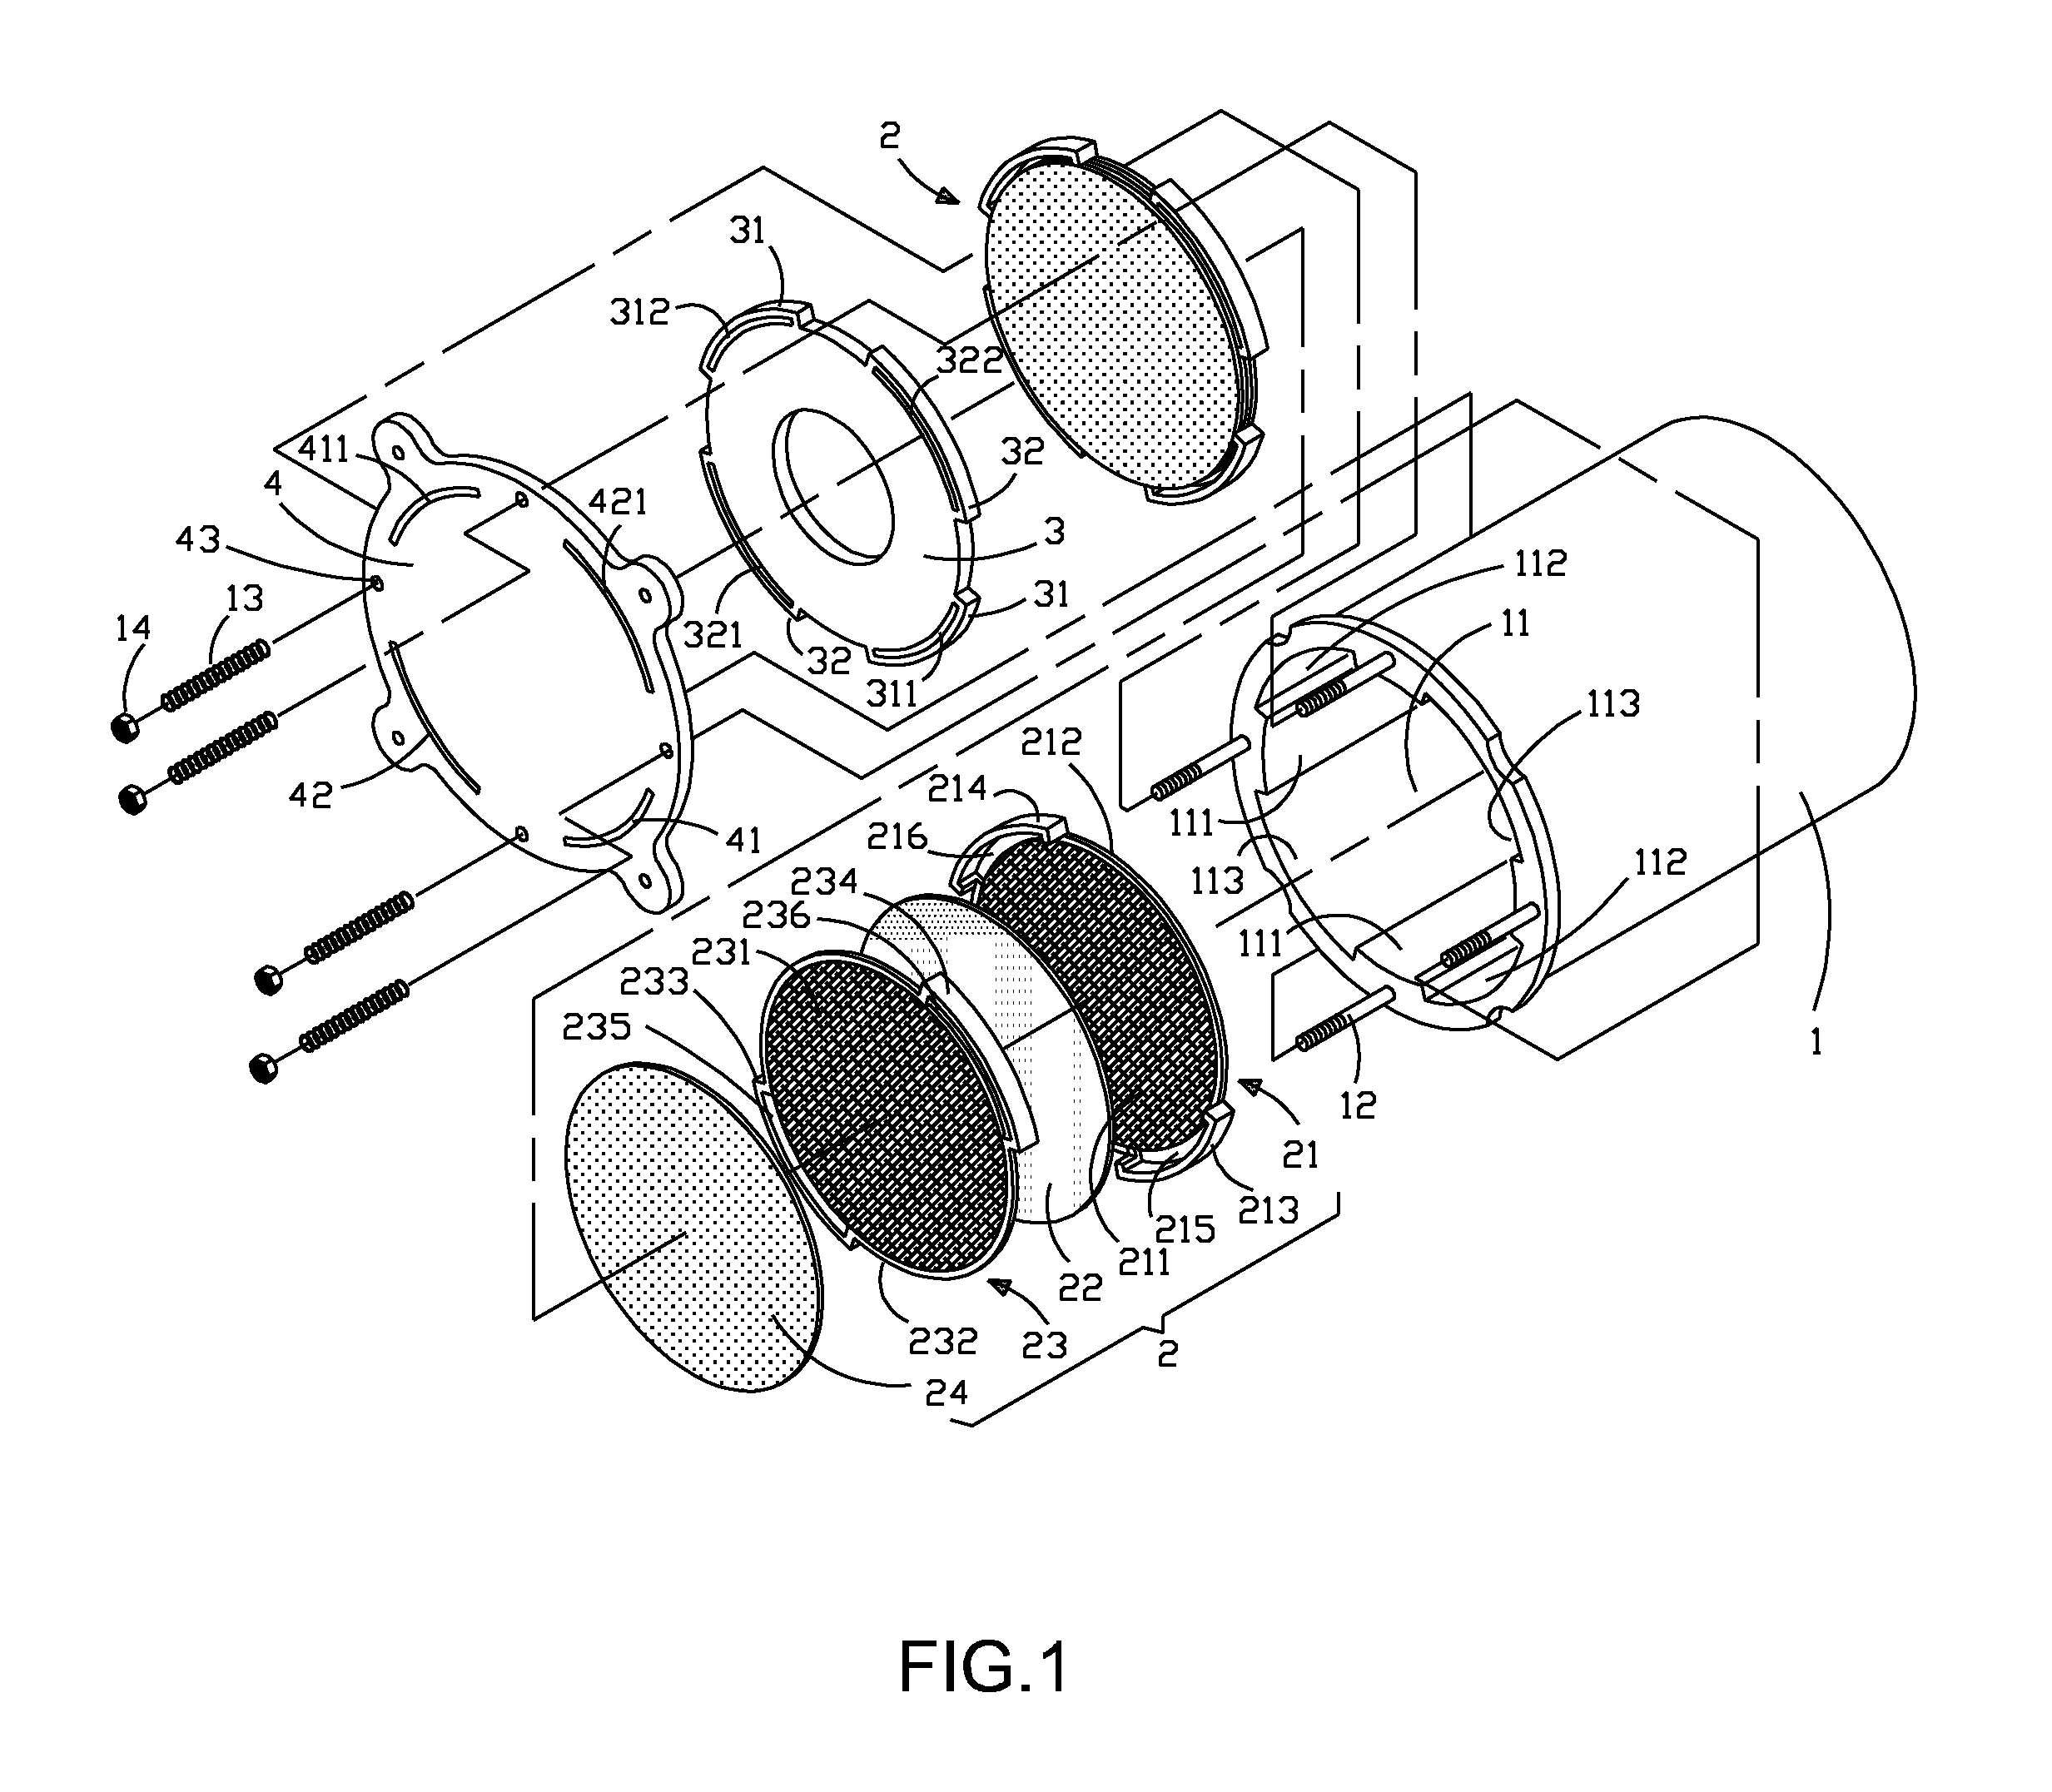 Fuel cell assembly structure